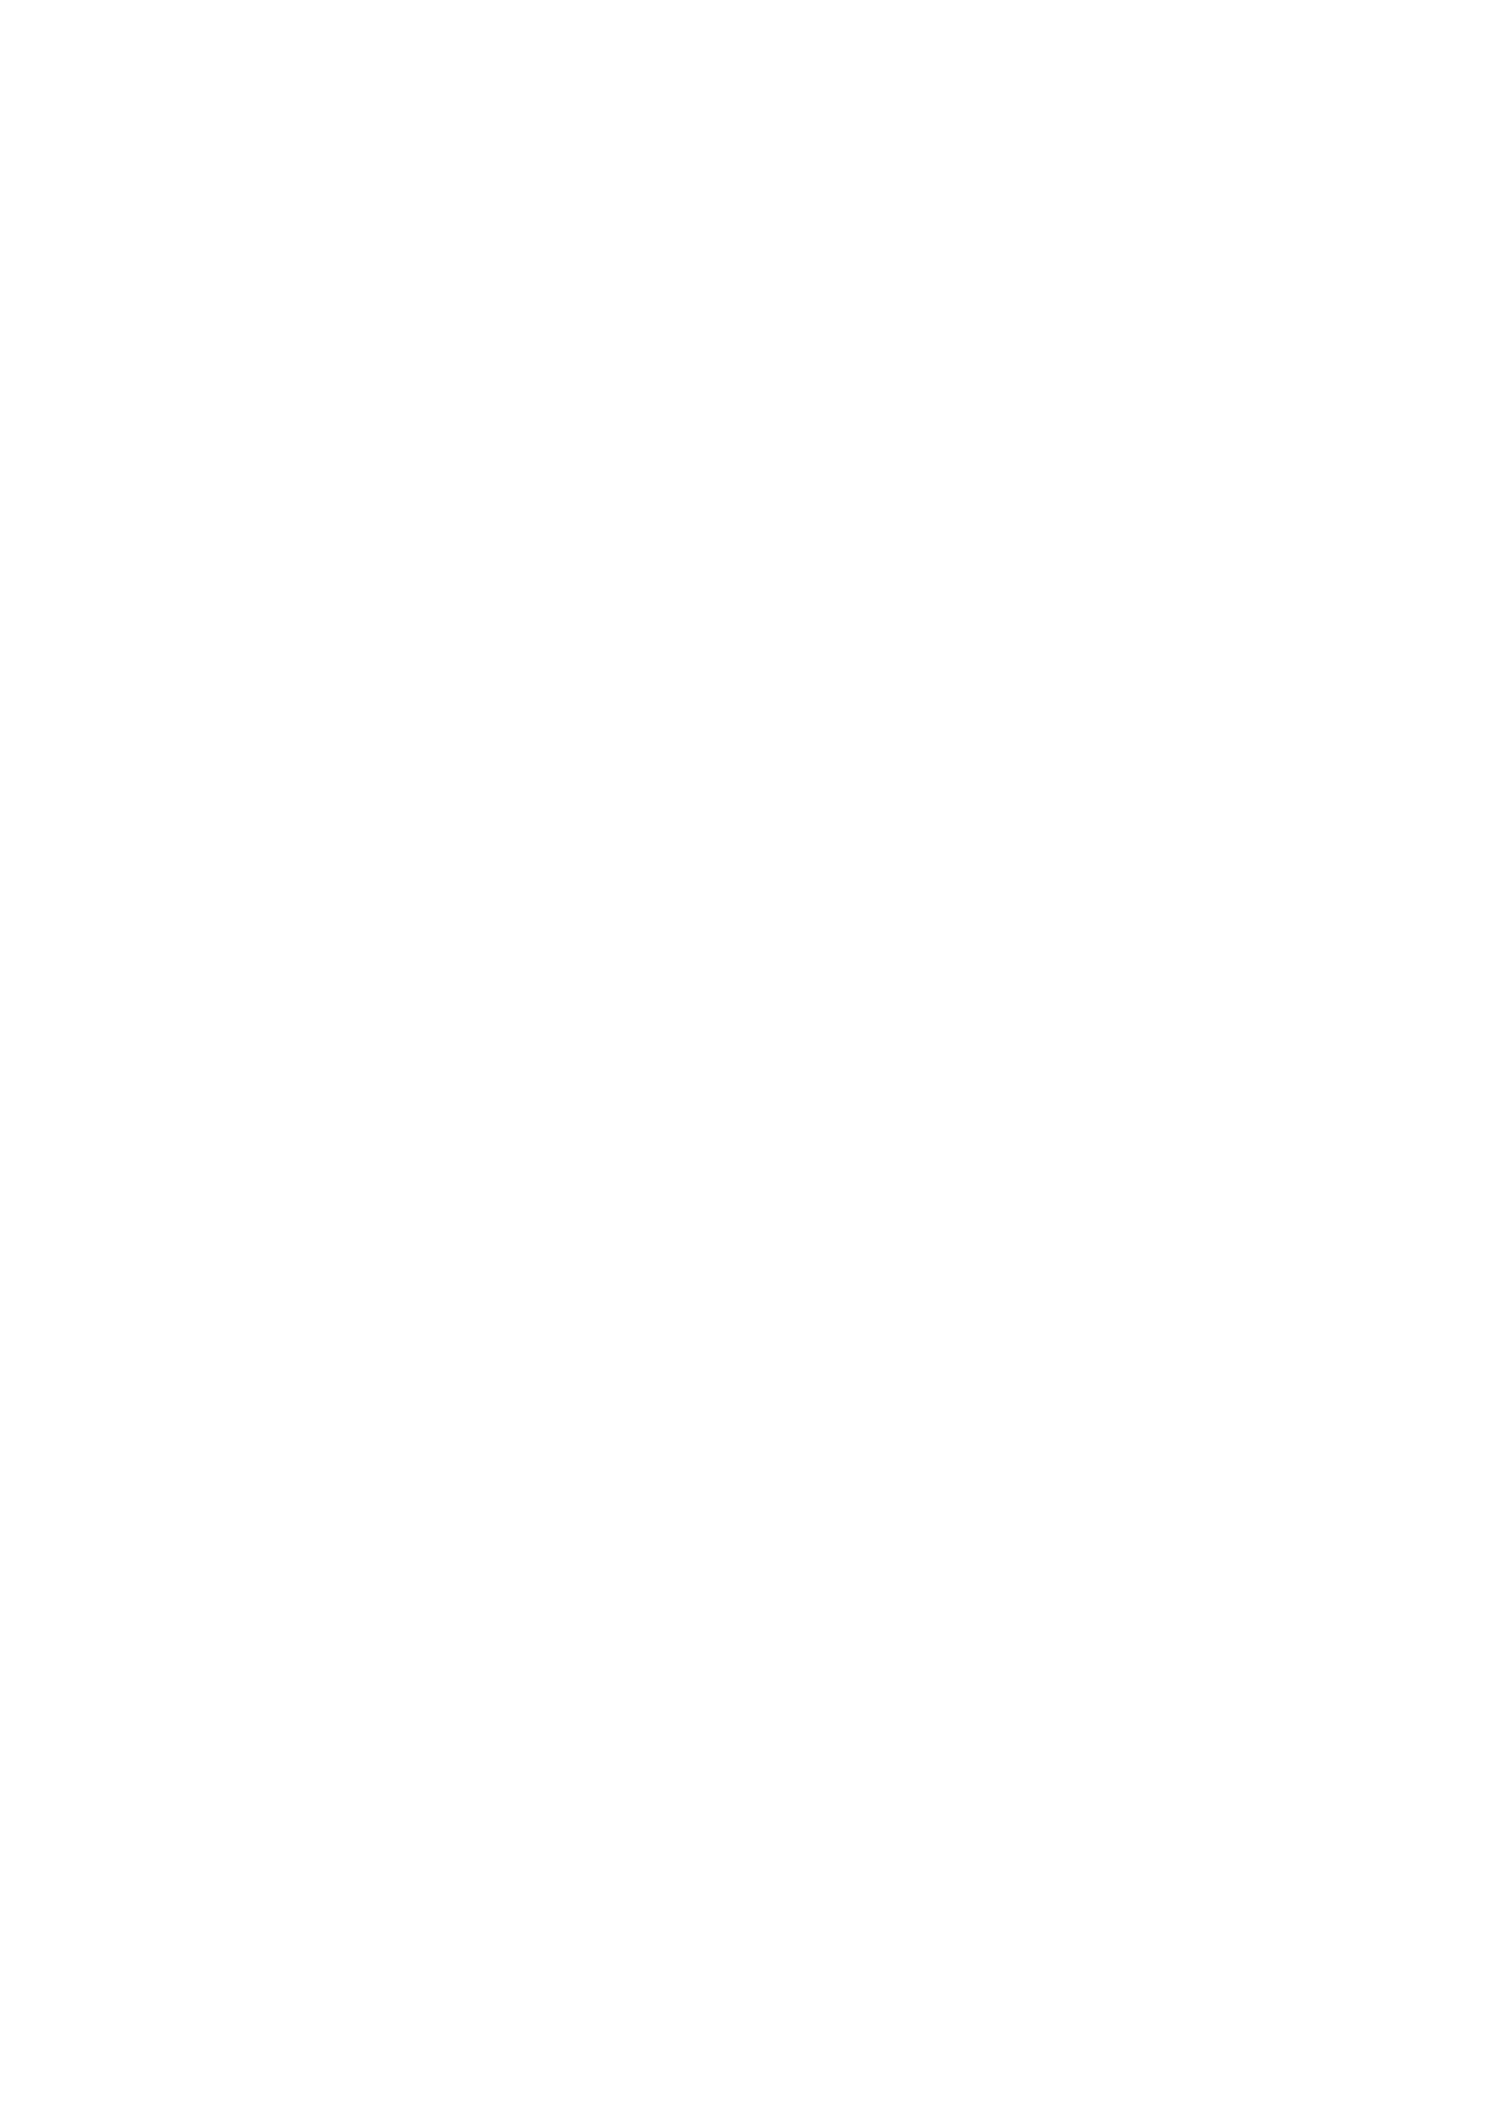 PHINOMENAL | Digital project management & Agile teamcoaching